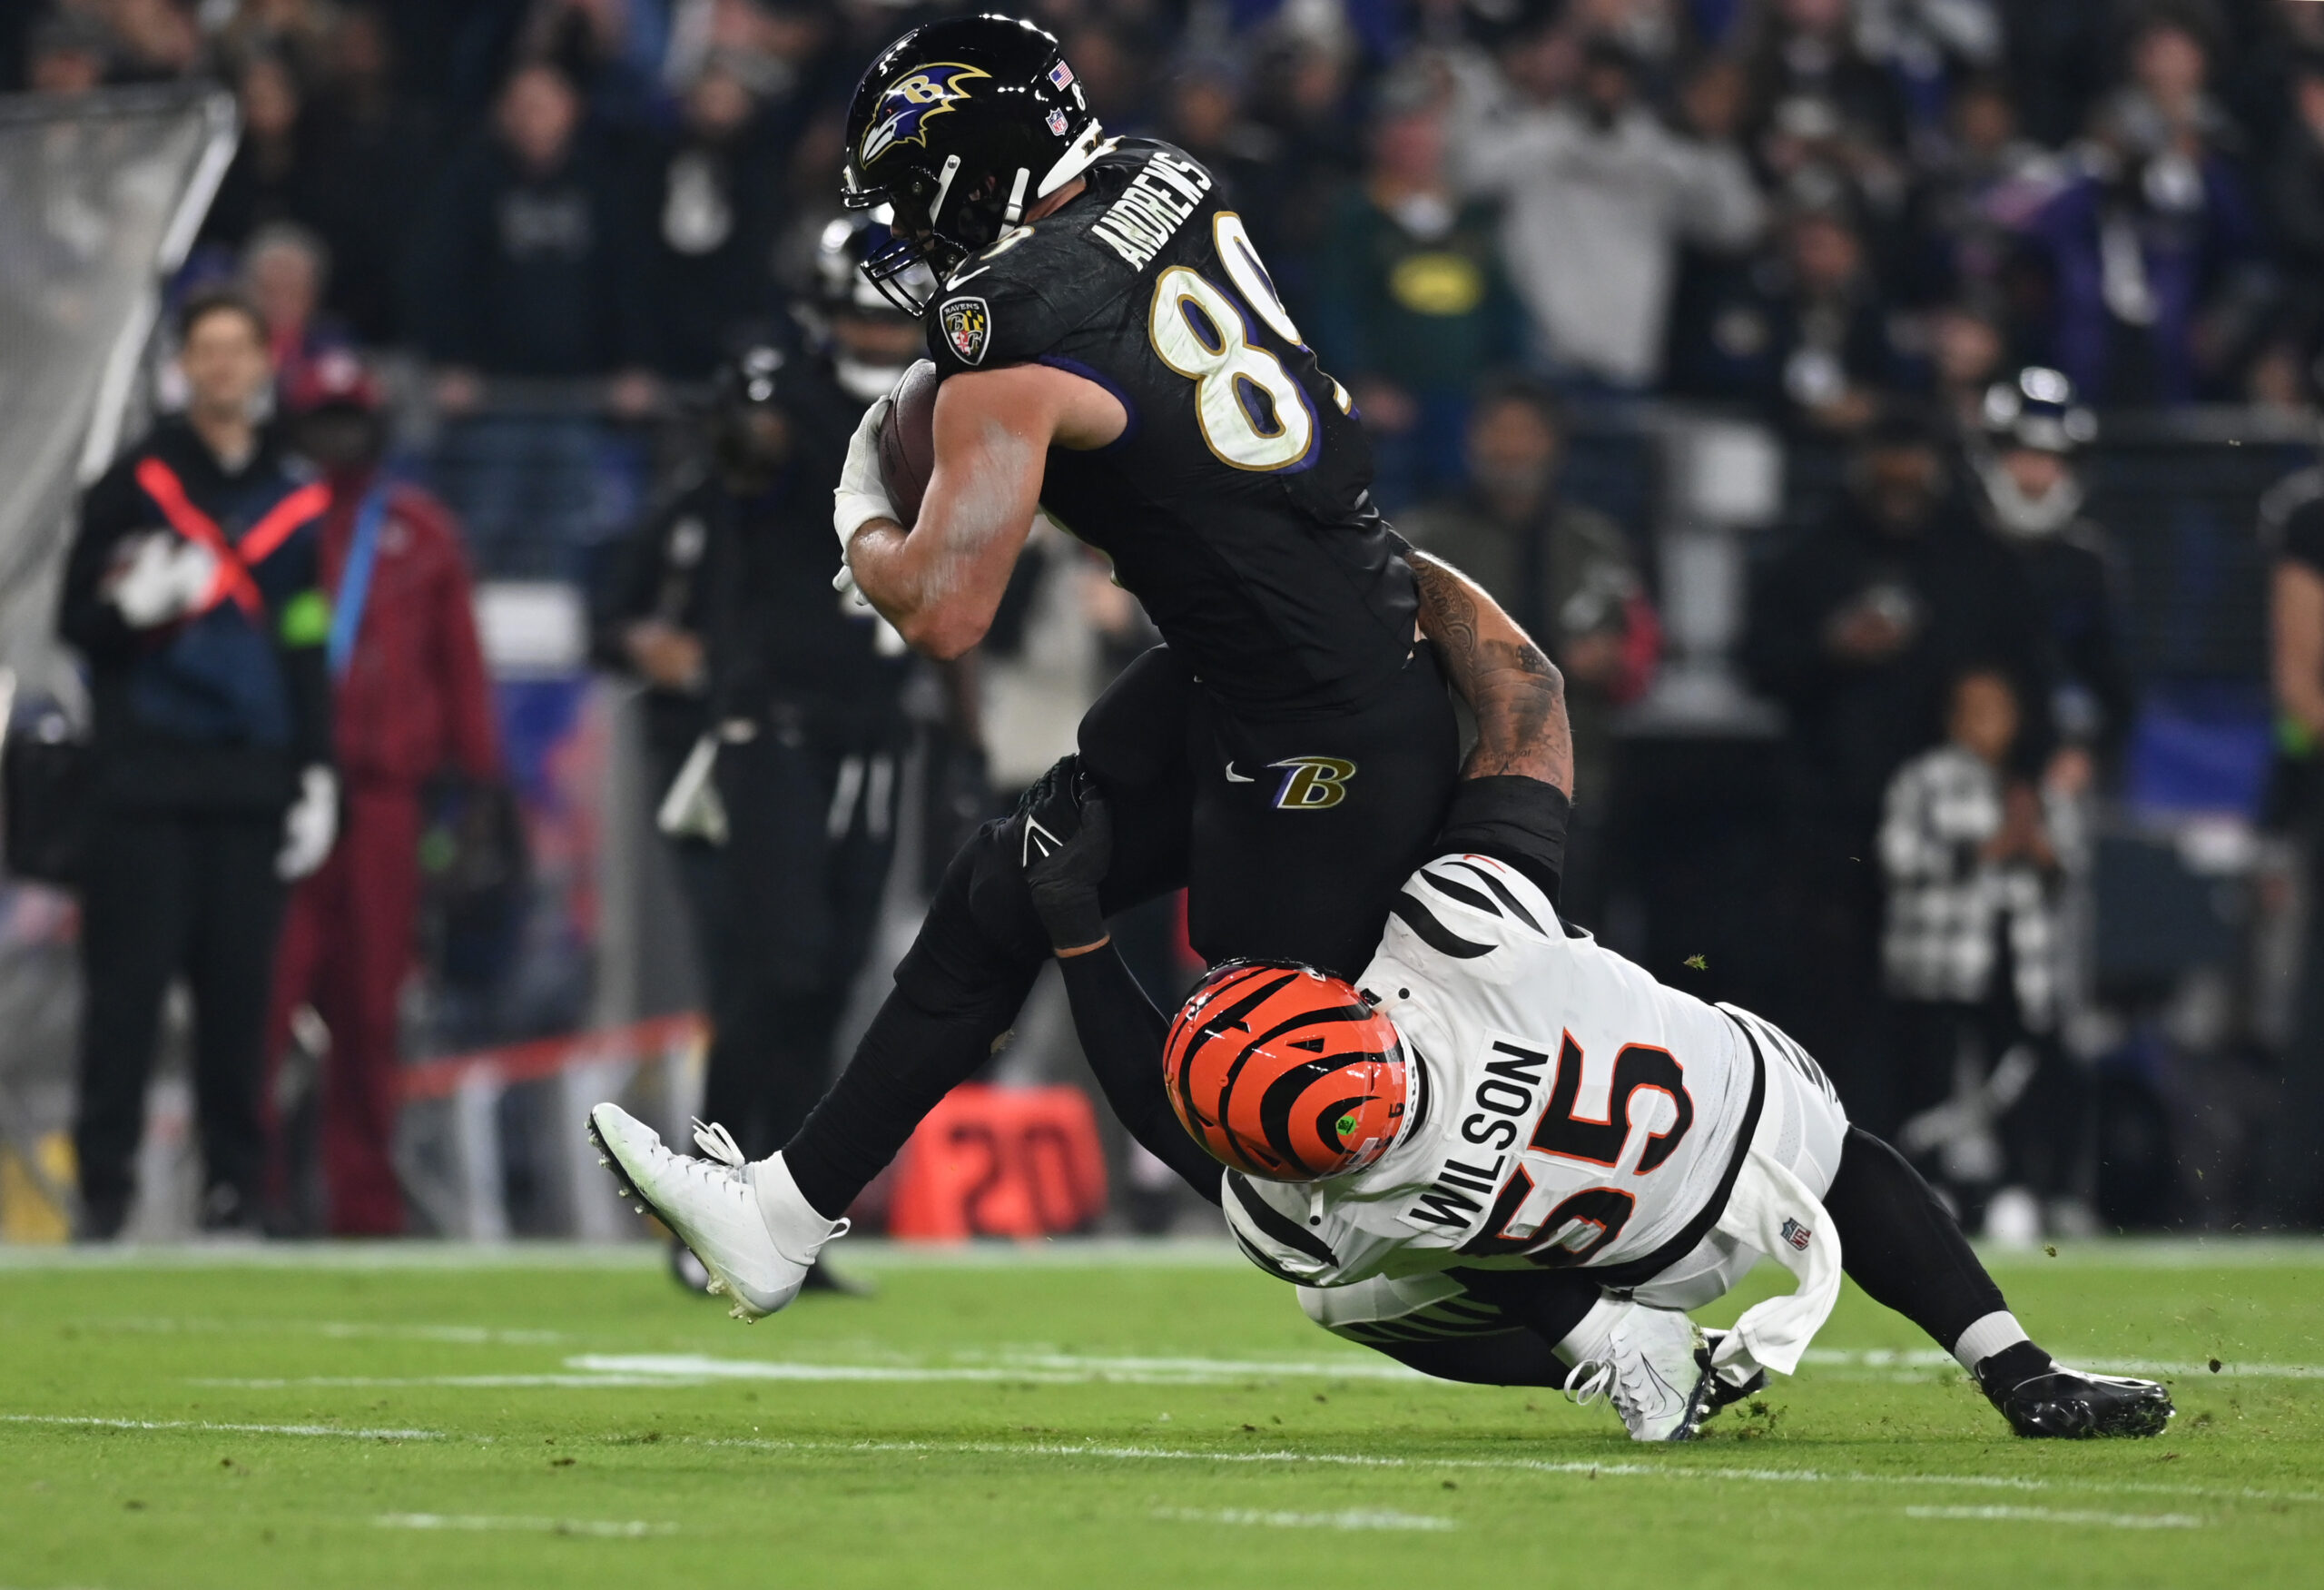 Mark Andrews tackled by a Bengals player